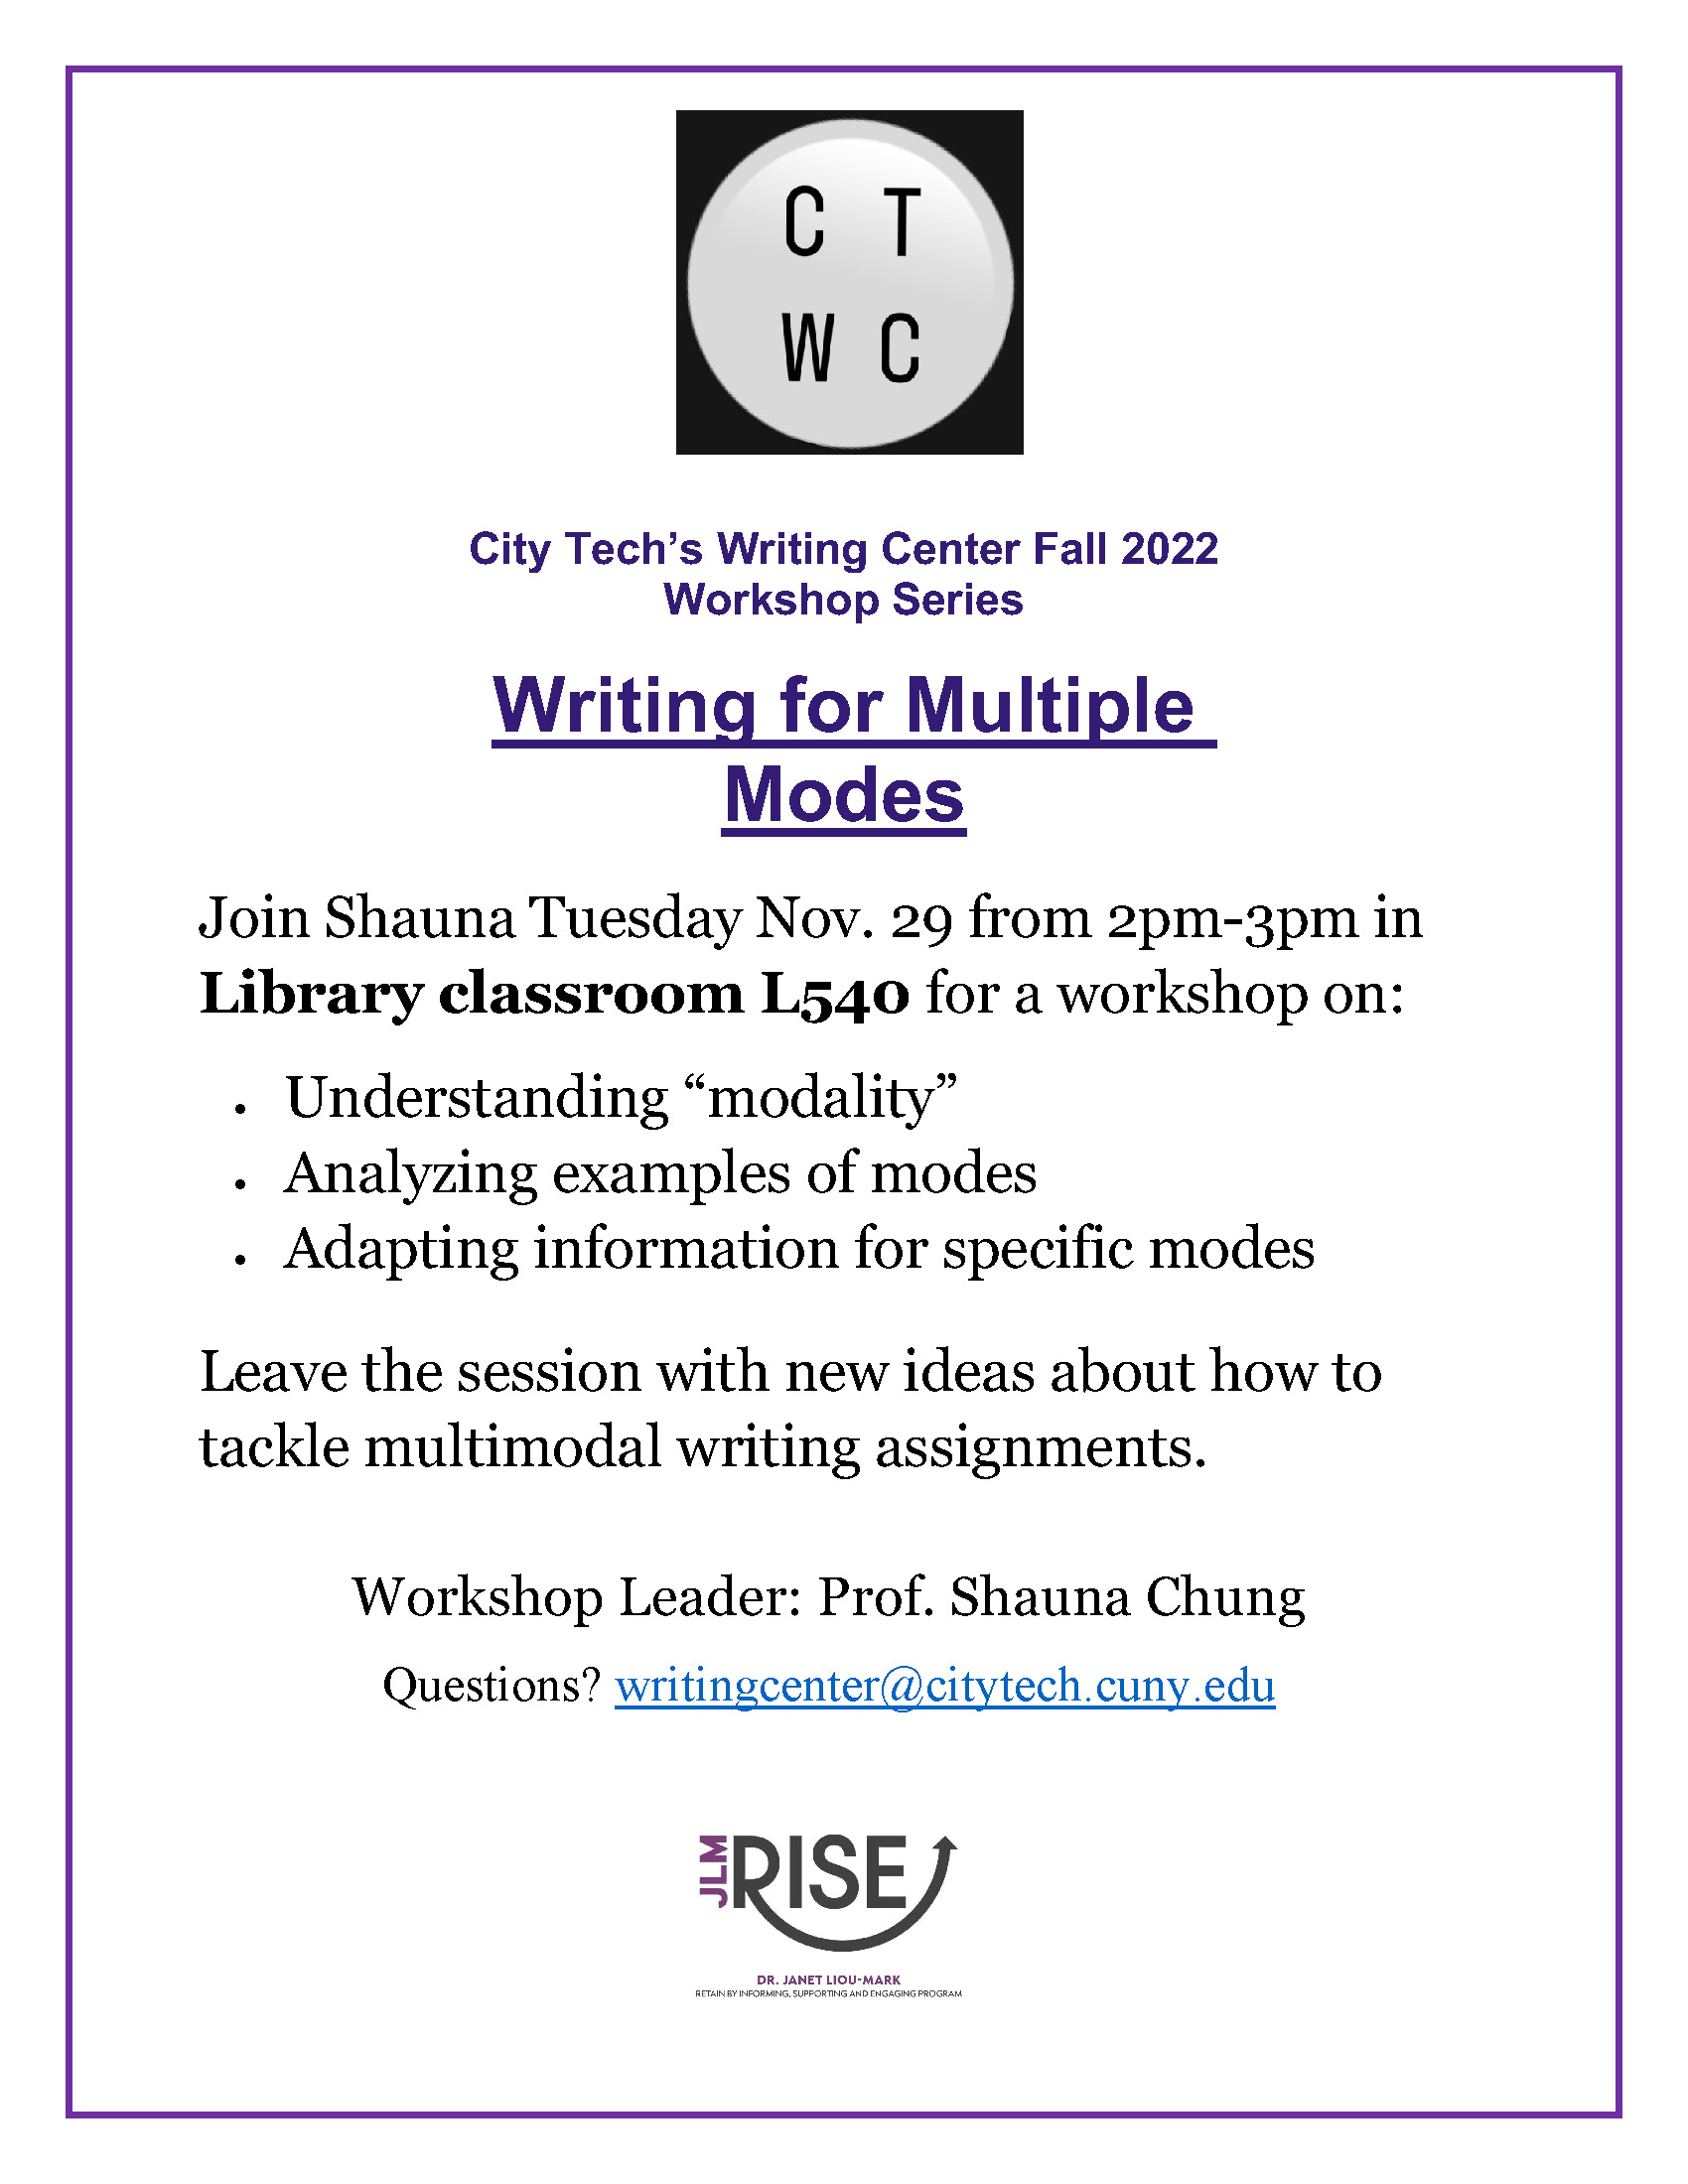 Writing for Multiple Modes Workshop